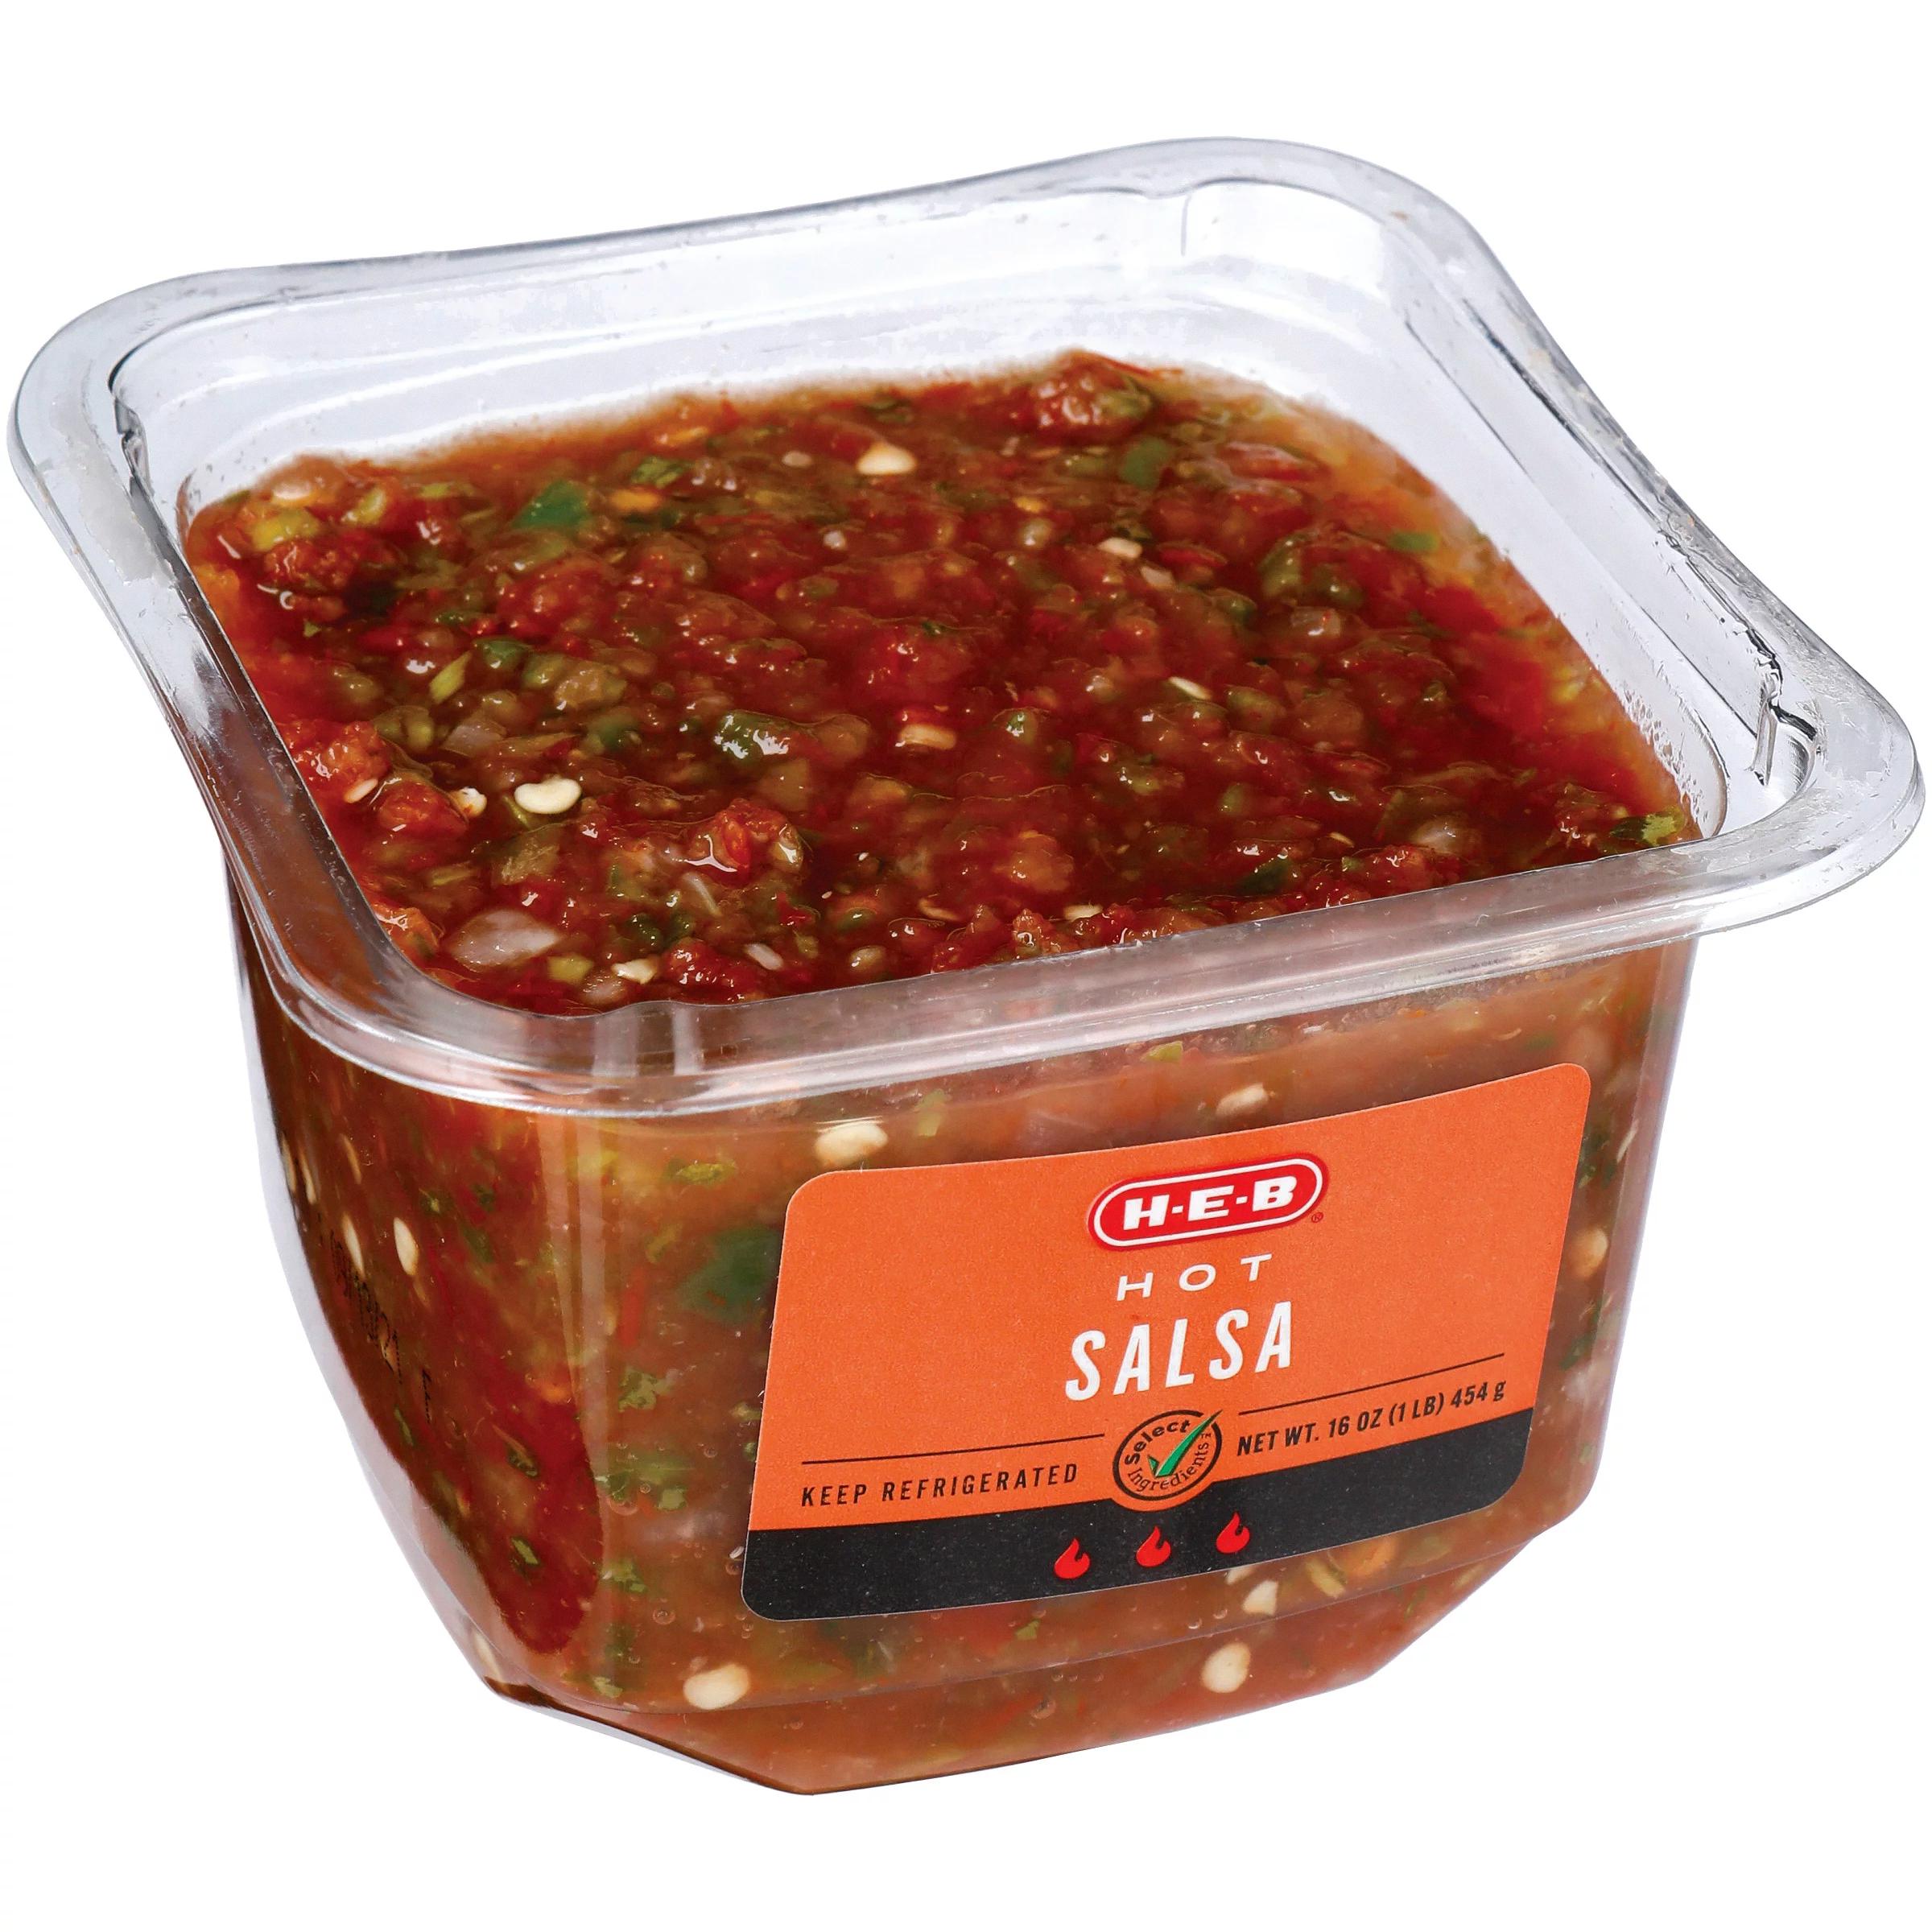 does salsa need to be refrigerated